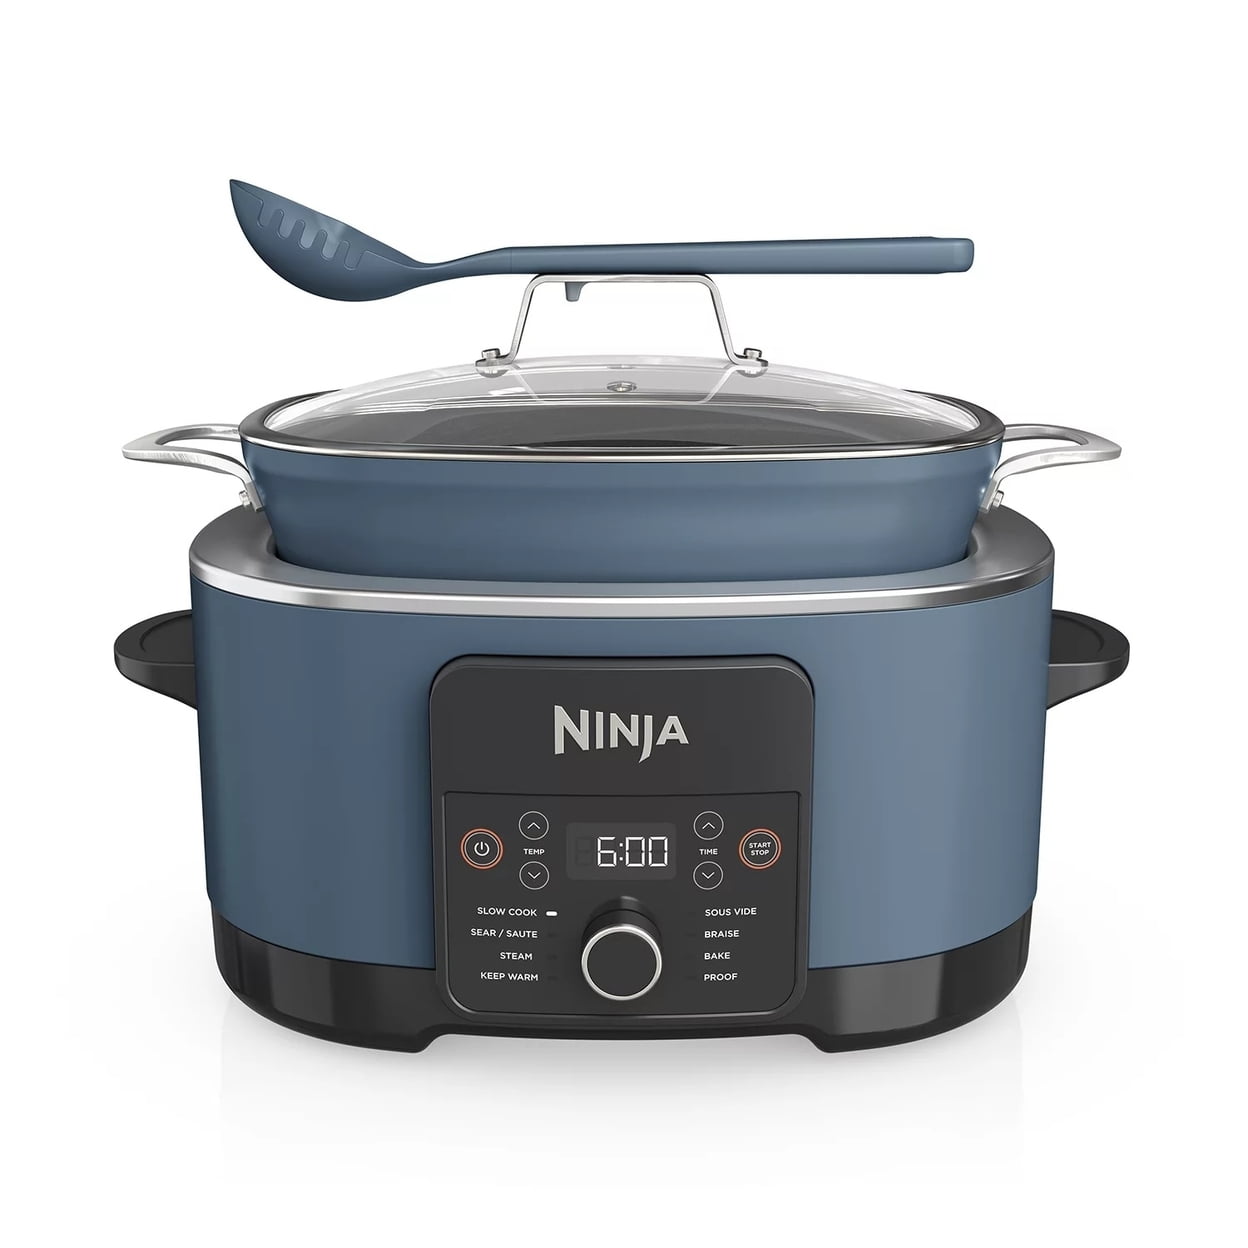 NINJA Combi All-in-1 6 Qt. Stainless Steel Electric Multi-Cooker